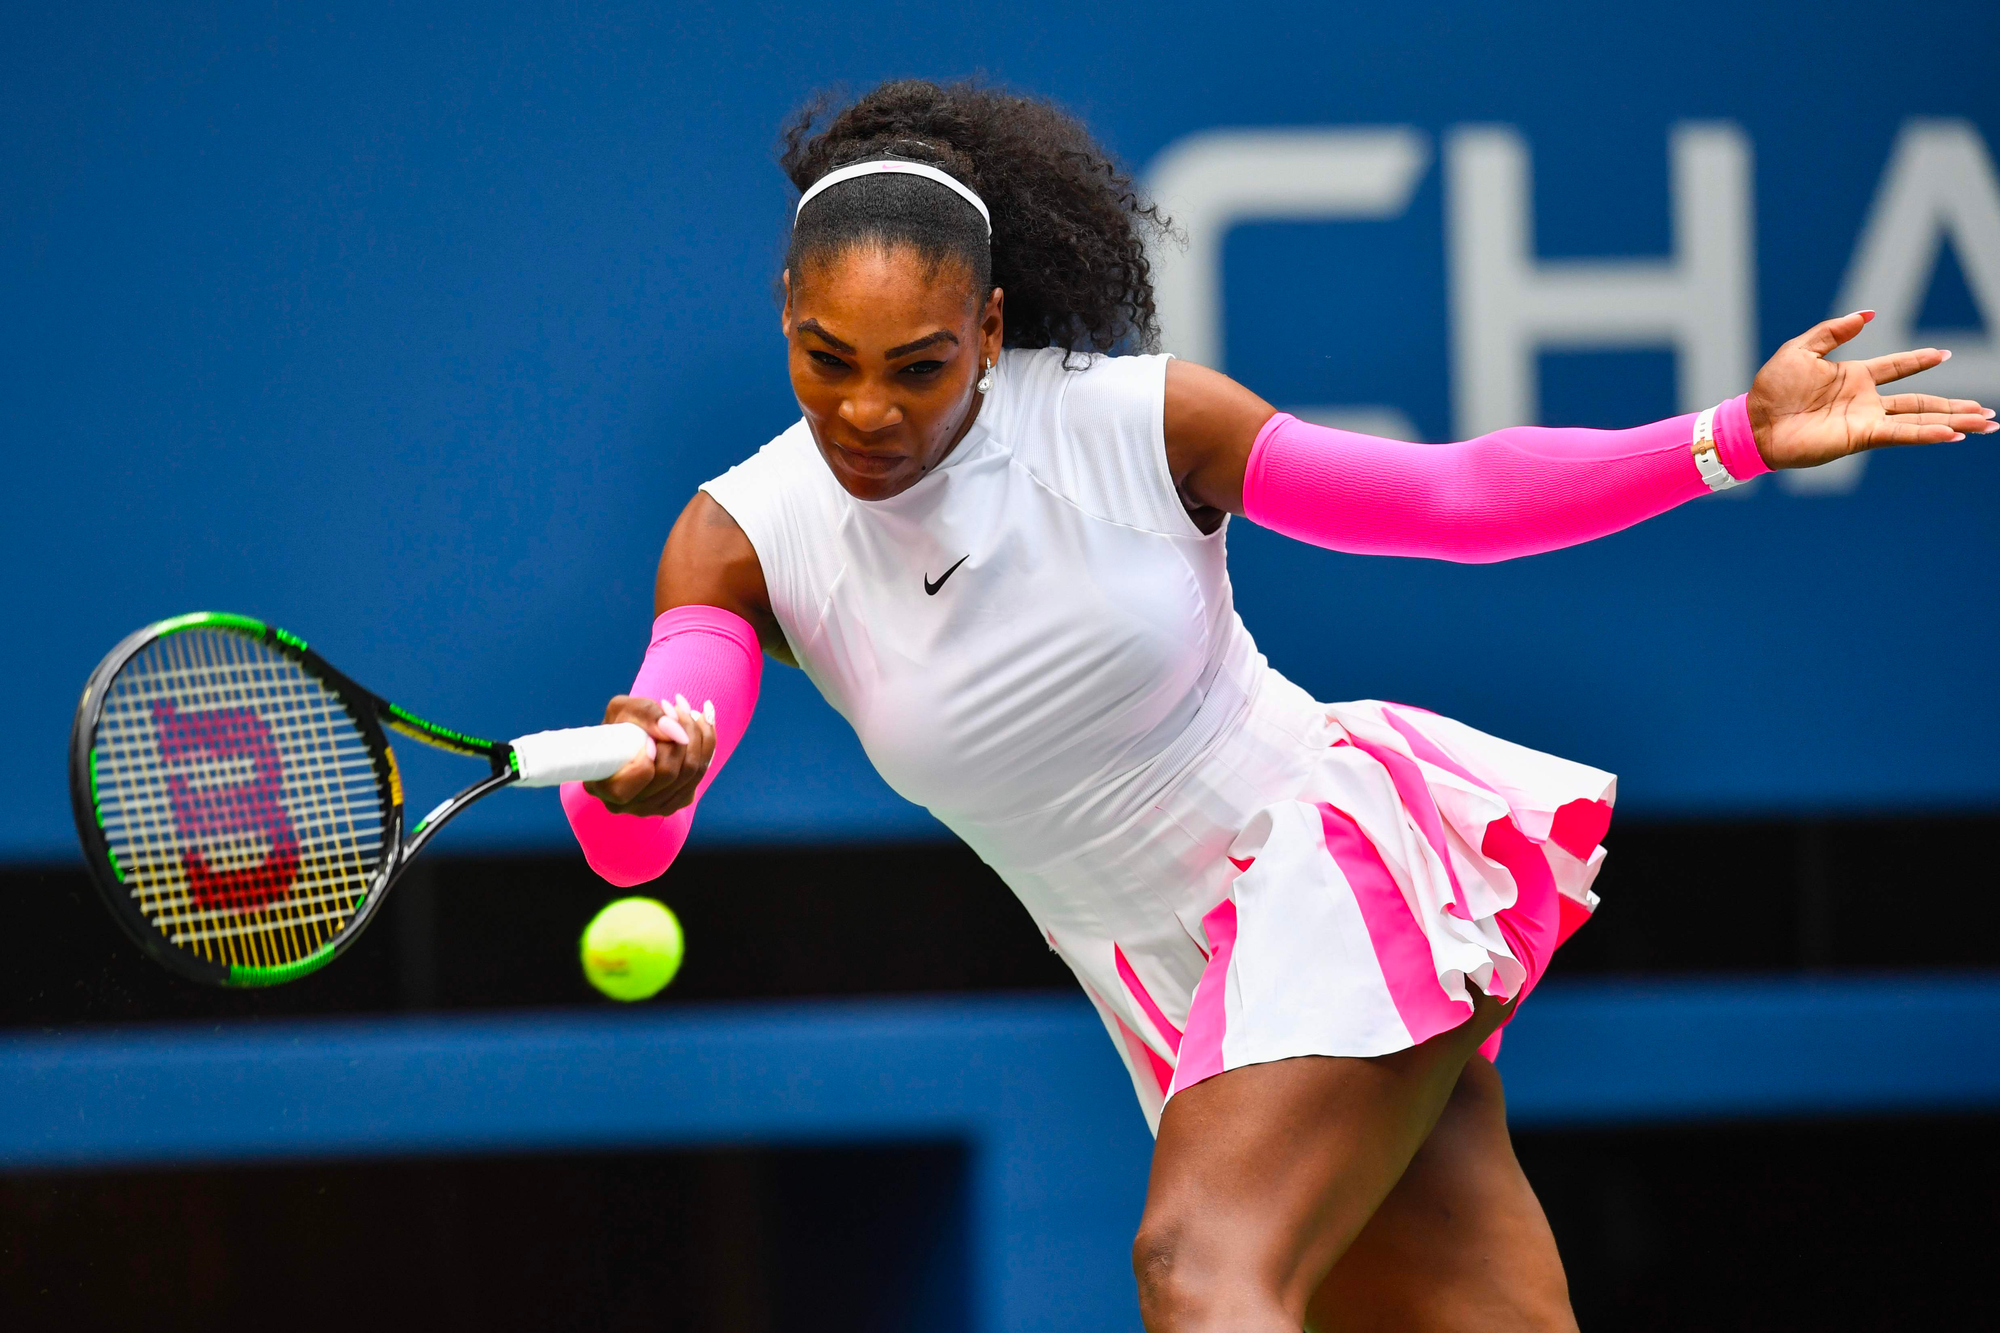 https://ftw.usatoday.com/2016/09/serena-williams-best-outfits-2016-us-open-nike-dress